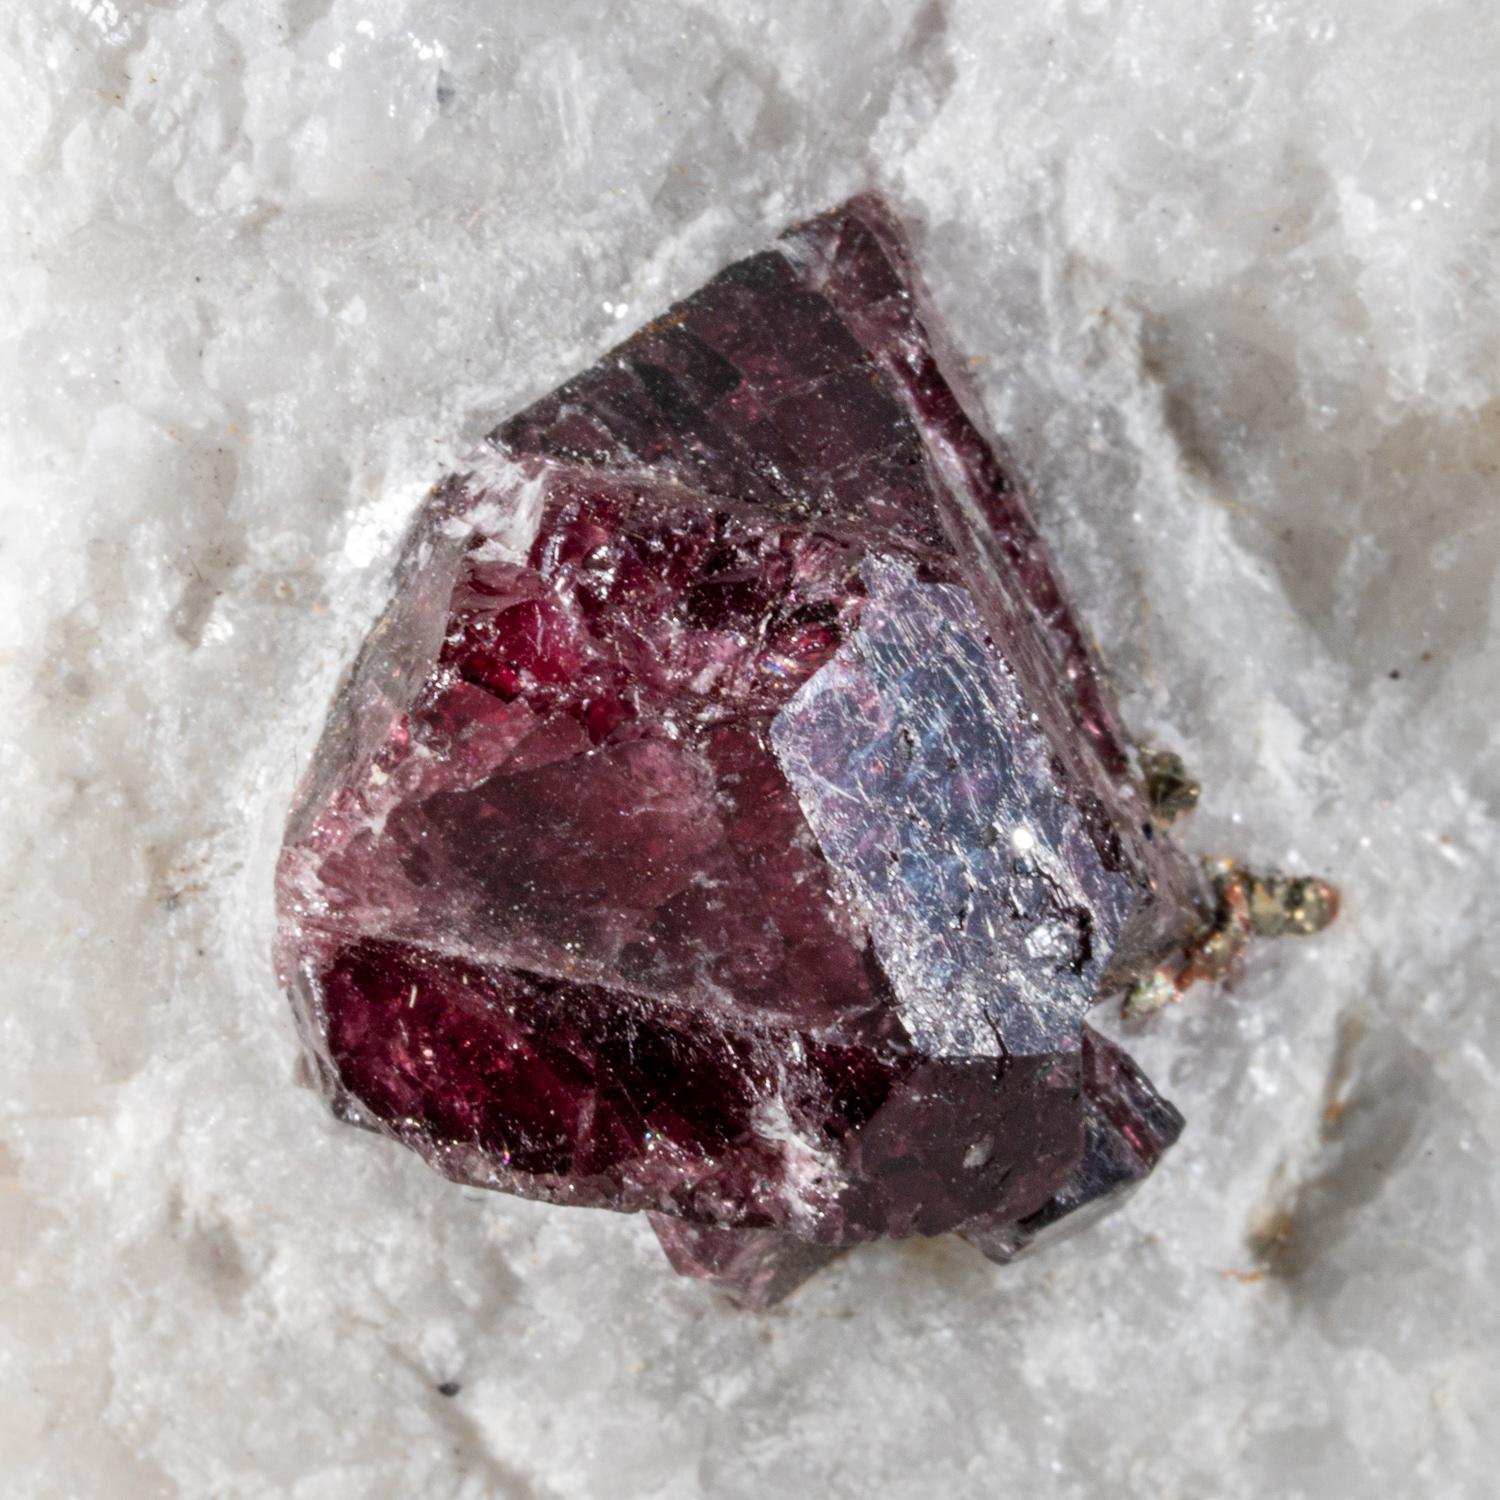 From Mysuru (formerly Mysore), Karnataka, India.

Exquisite, several translucent deep-pink ruby crystals, the pink gem variety of the mineral species corundum, well exposed on quartz matrix. The ruby crystal have irregular mottled surfaces, bright